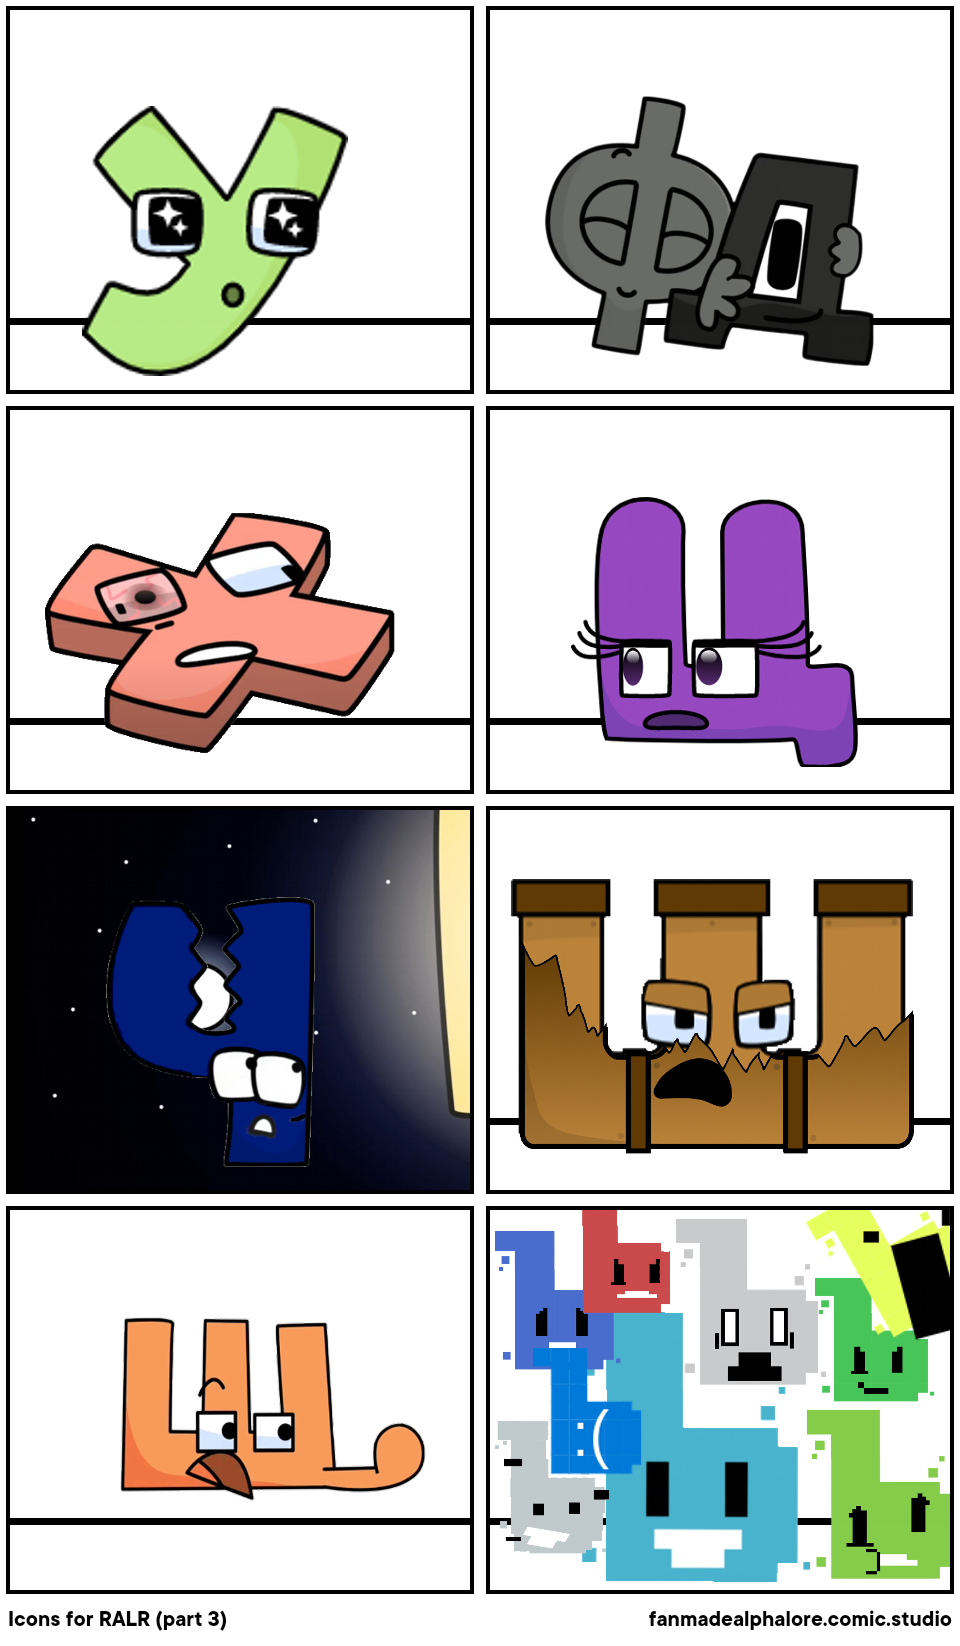 Icons for RALR (part 3)